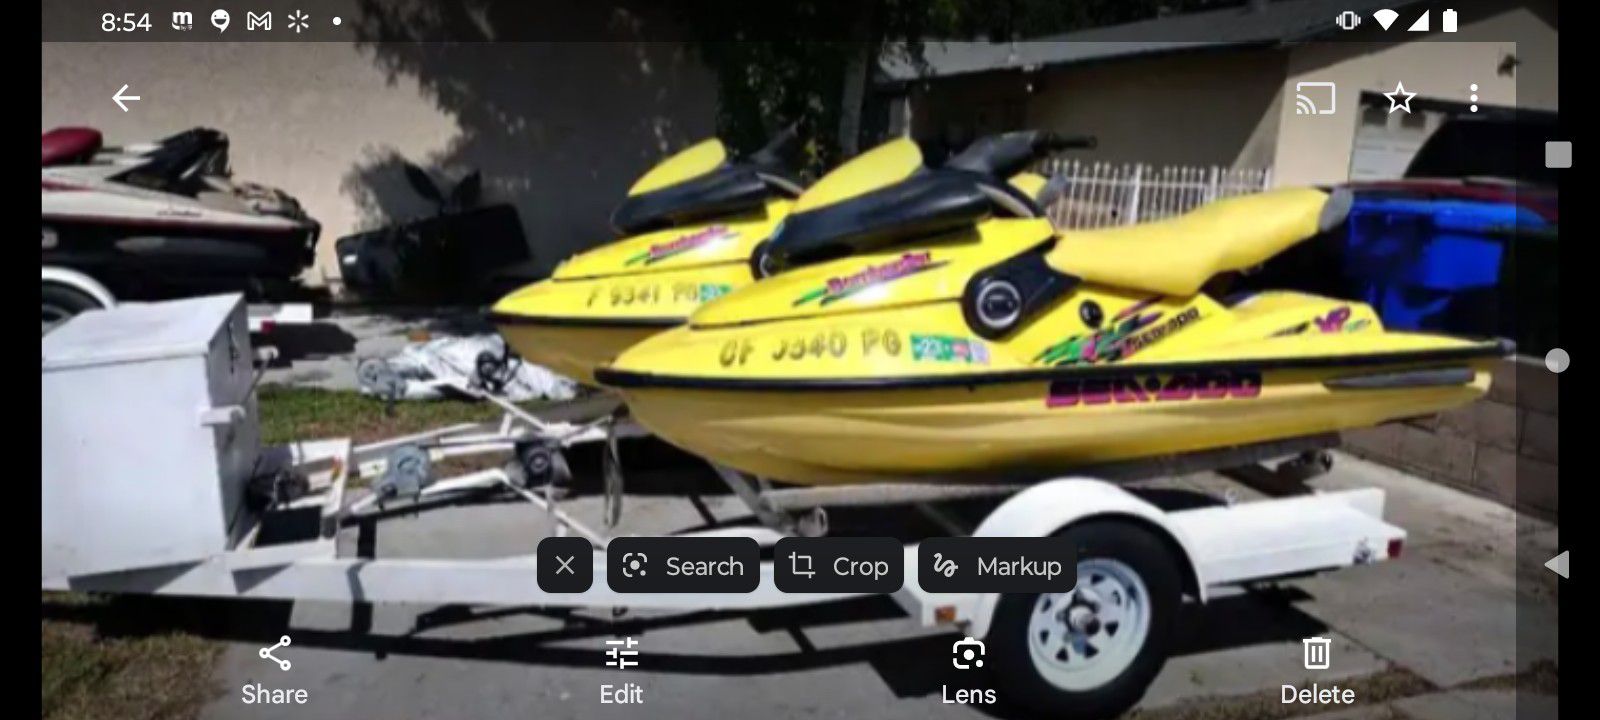 2 97 SEADOO SPRINGSEATS  RUNNING CONDITION NEW SEATS AND CHIN BAR PADS 2250 EACH SKI 😆 PACKAGE DEAL 4700 😆😆😆😆